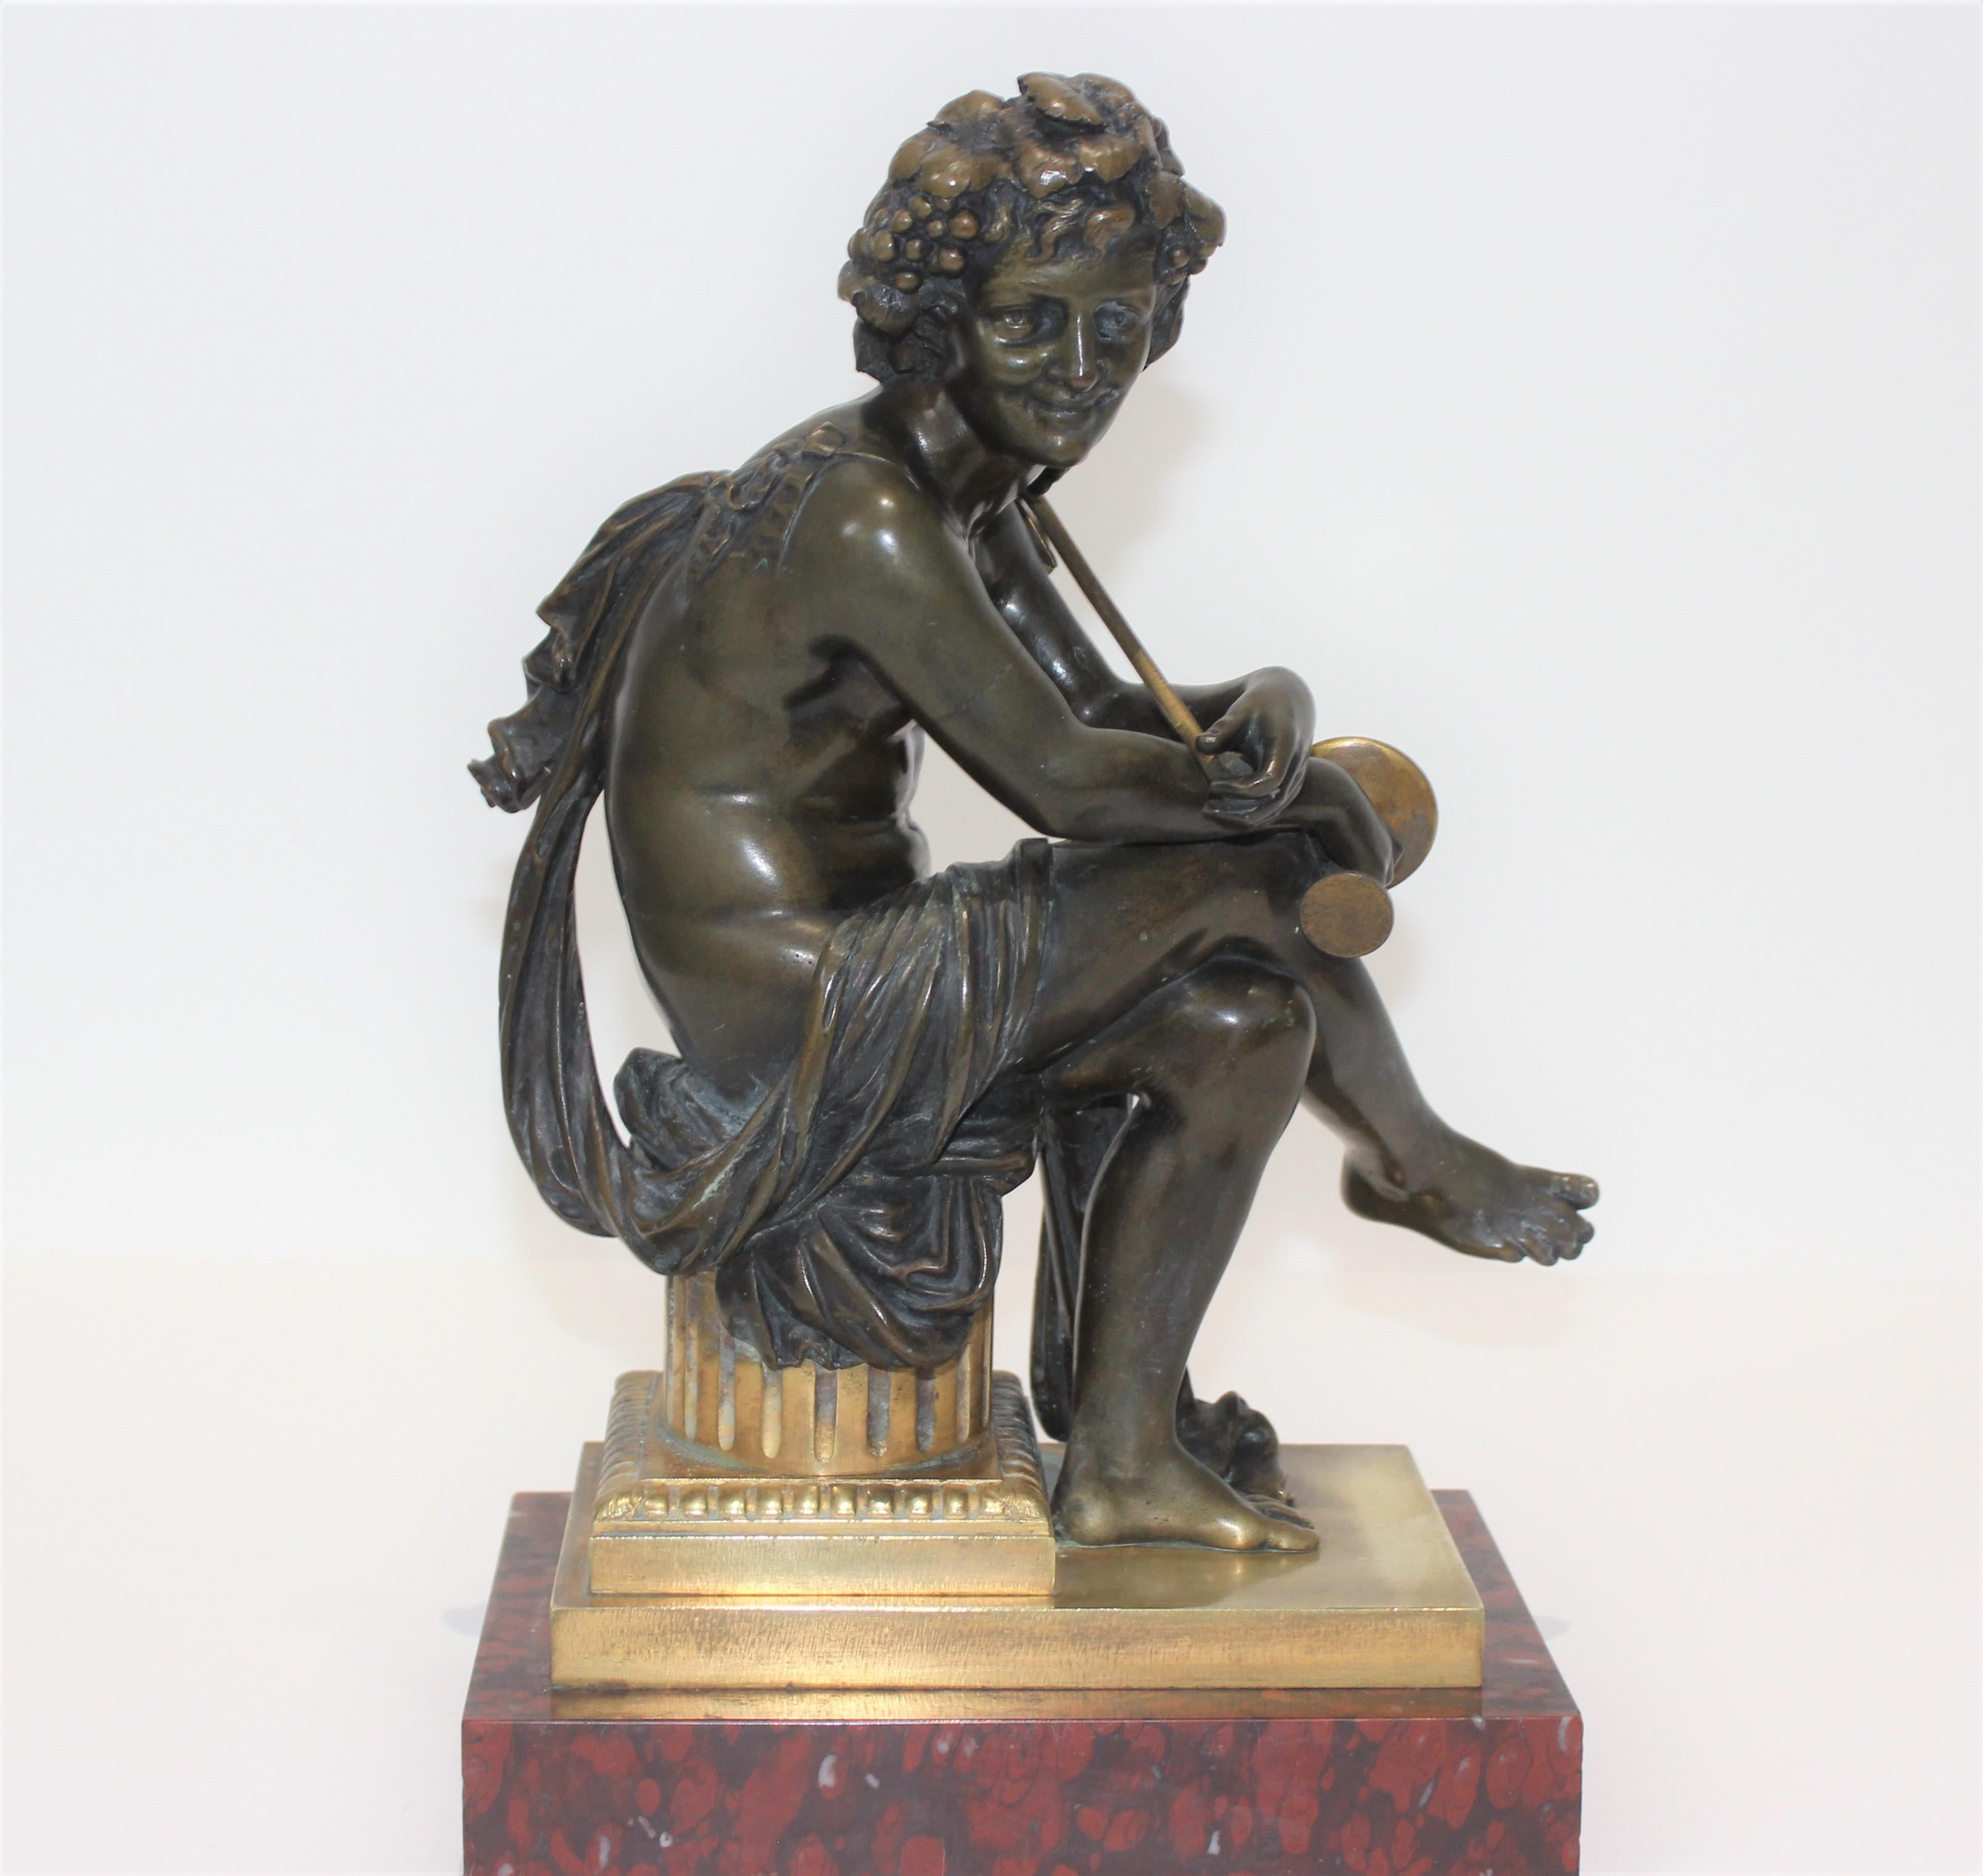 European tour bacchus bronze sculpture on gilt and rouge Royale marble base from a palm beach estate

Note the refinement of the fingers and toes.